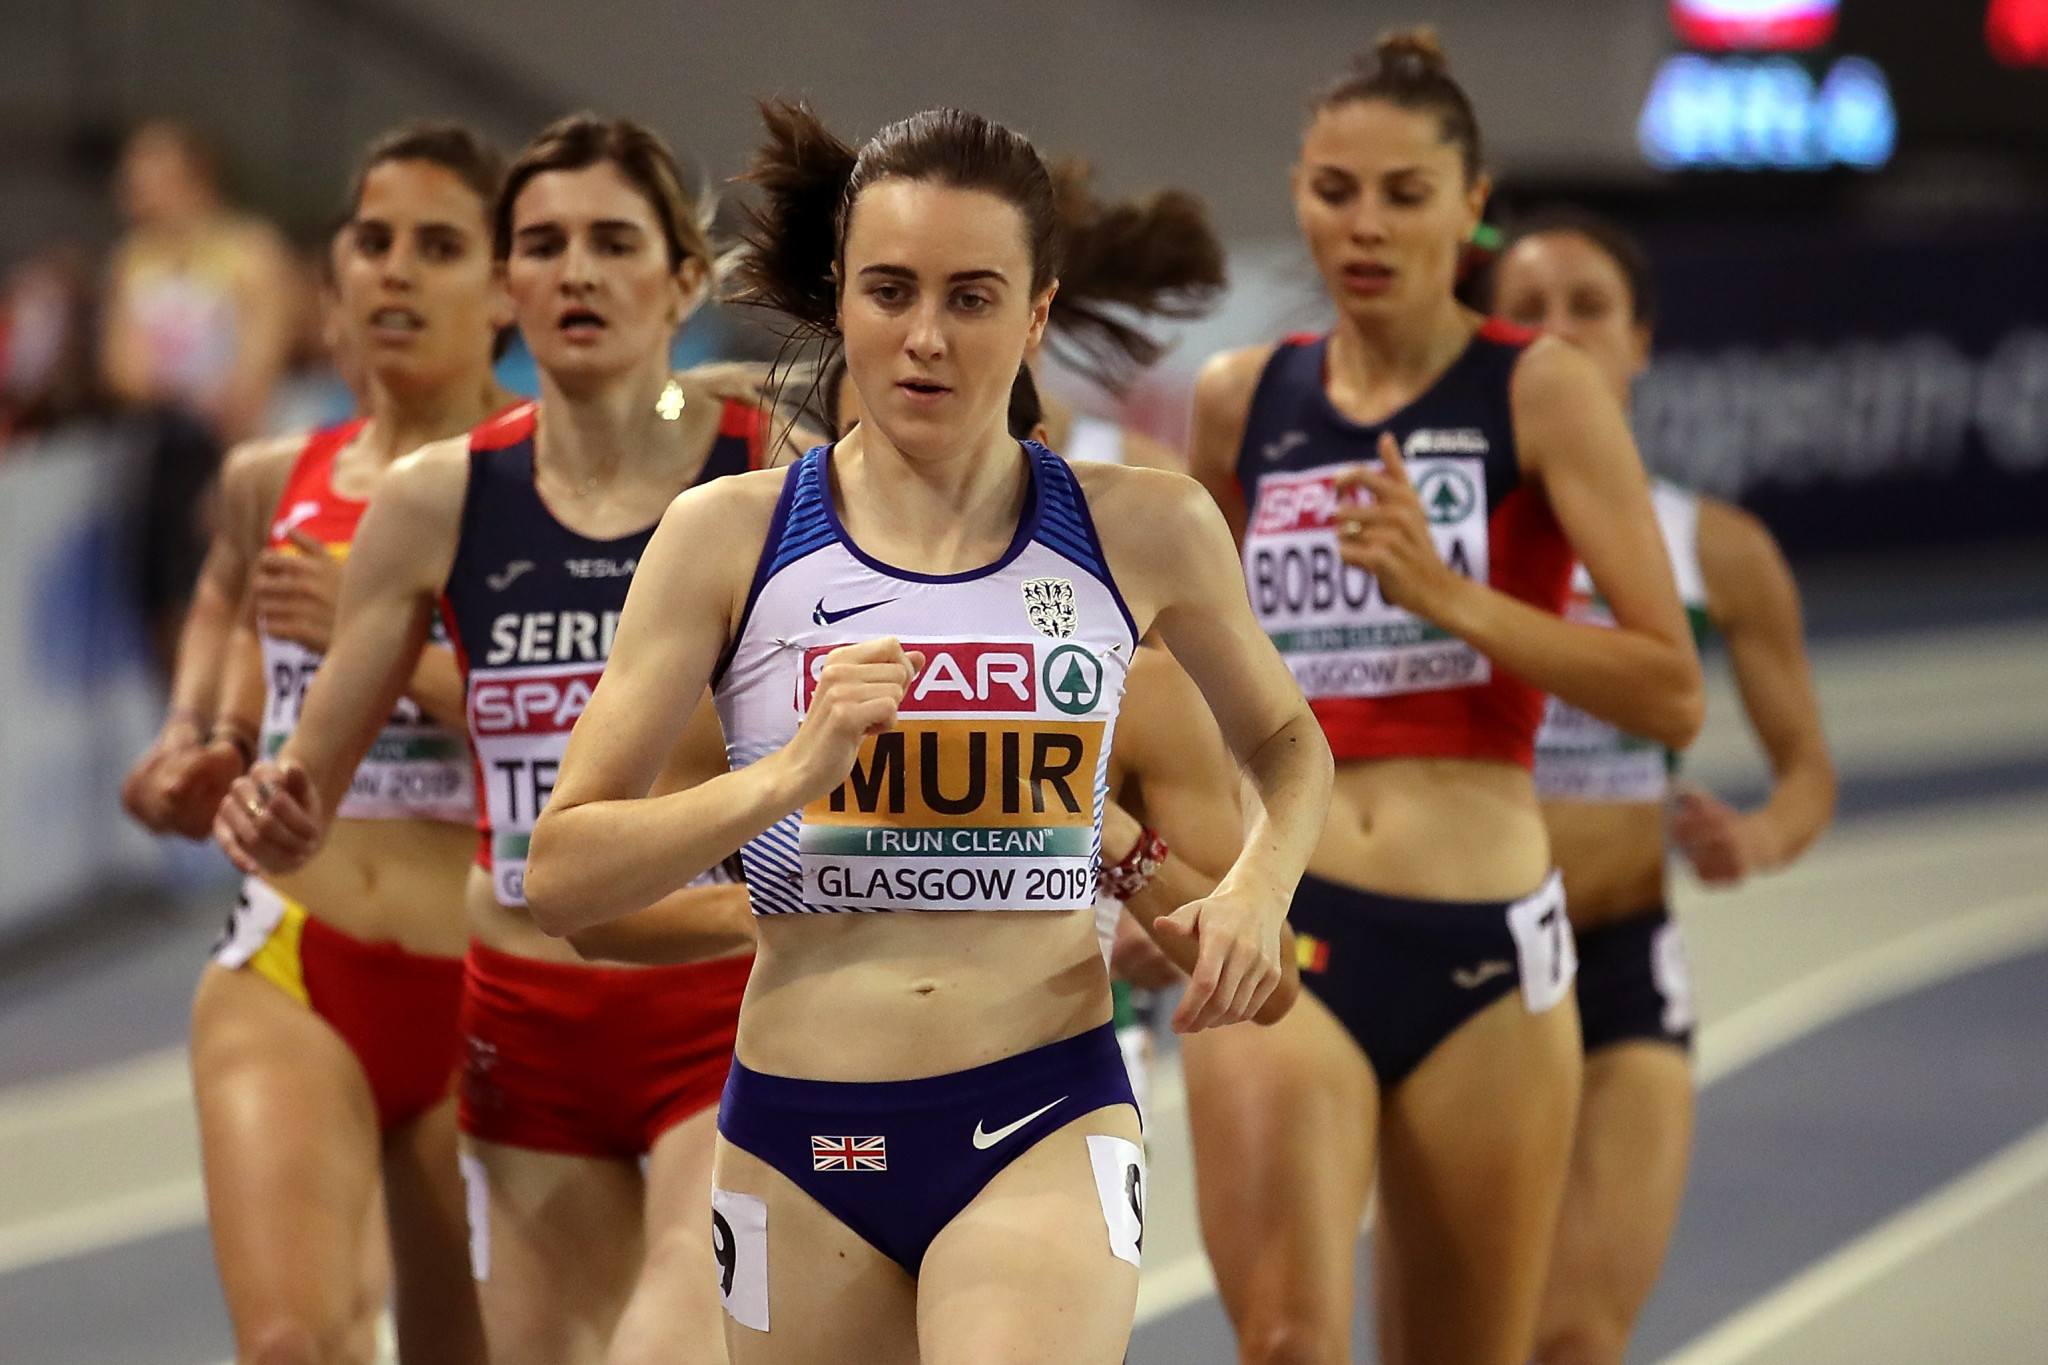 Local heroine Muir completes "double double" at European Athletics Indoor Championships